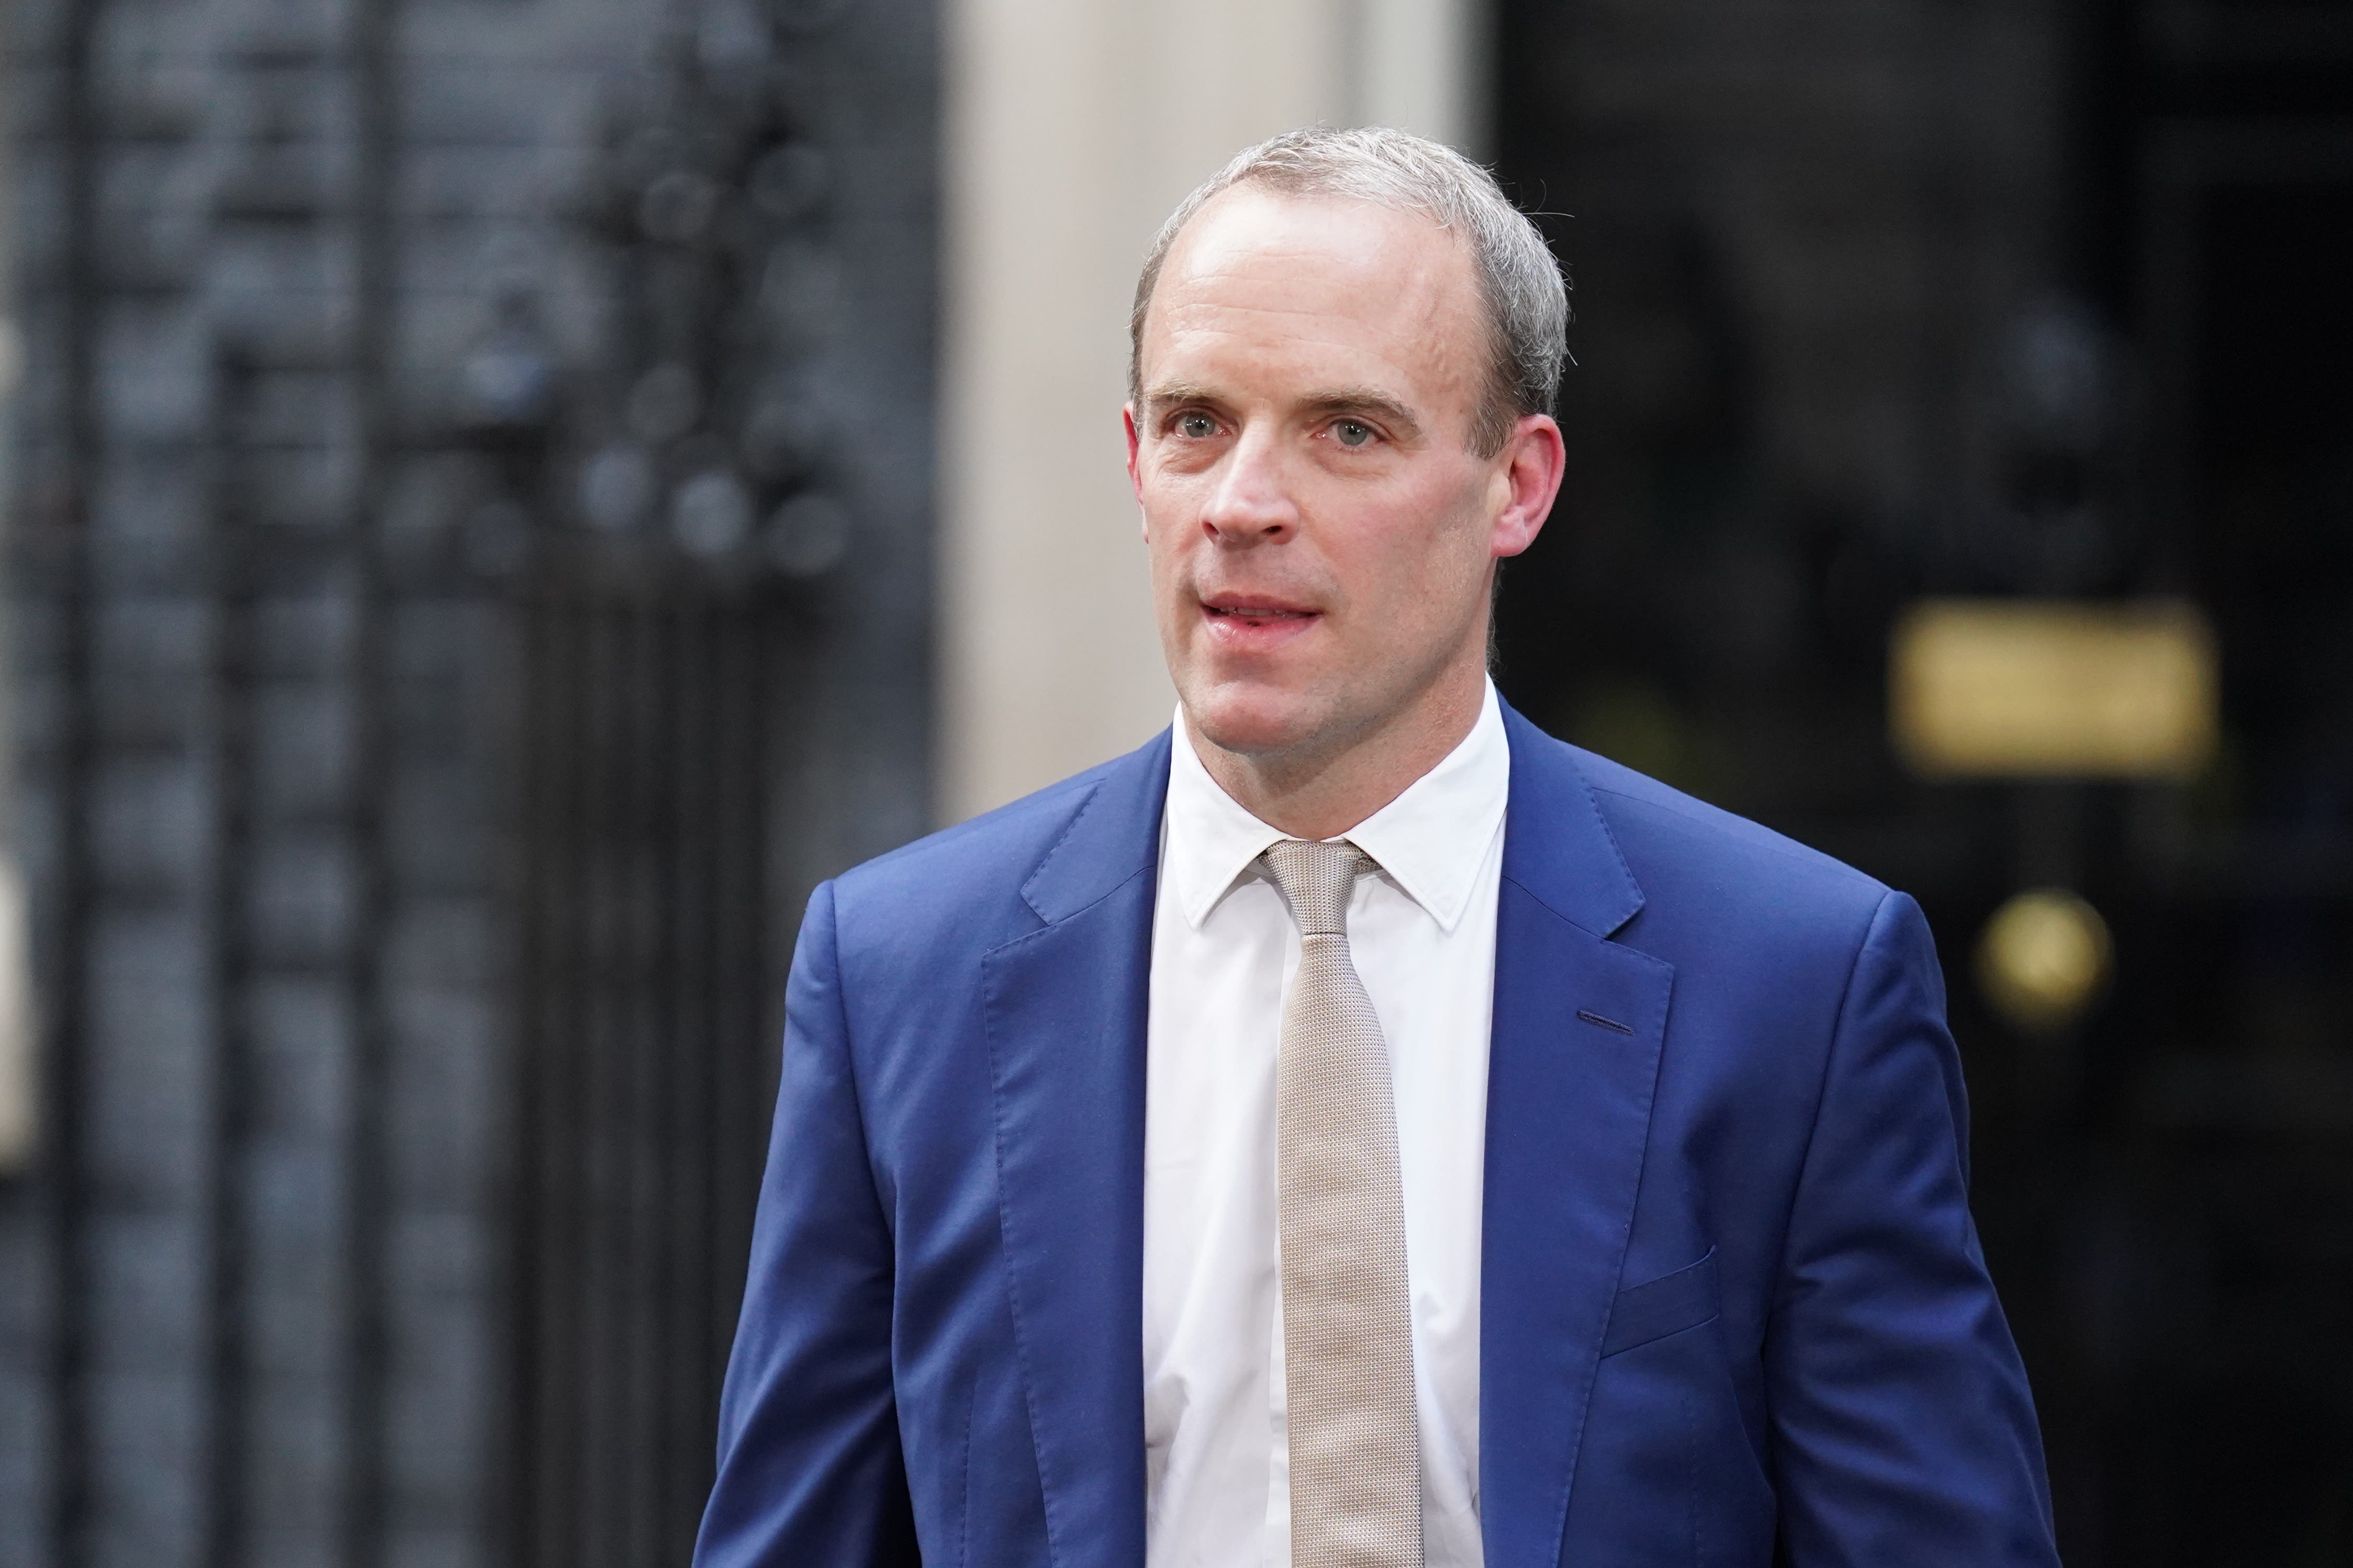 Dominic Raab resigned from the Government after Adam Tolley KC upheld two bullying complaints against him